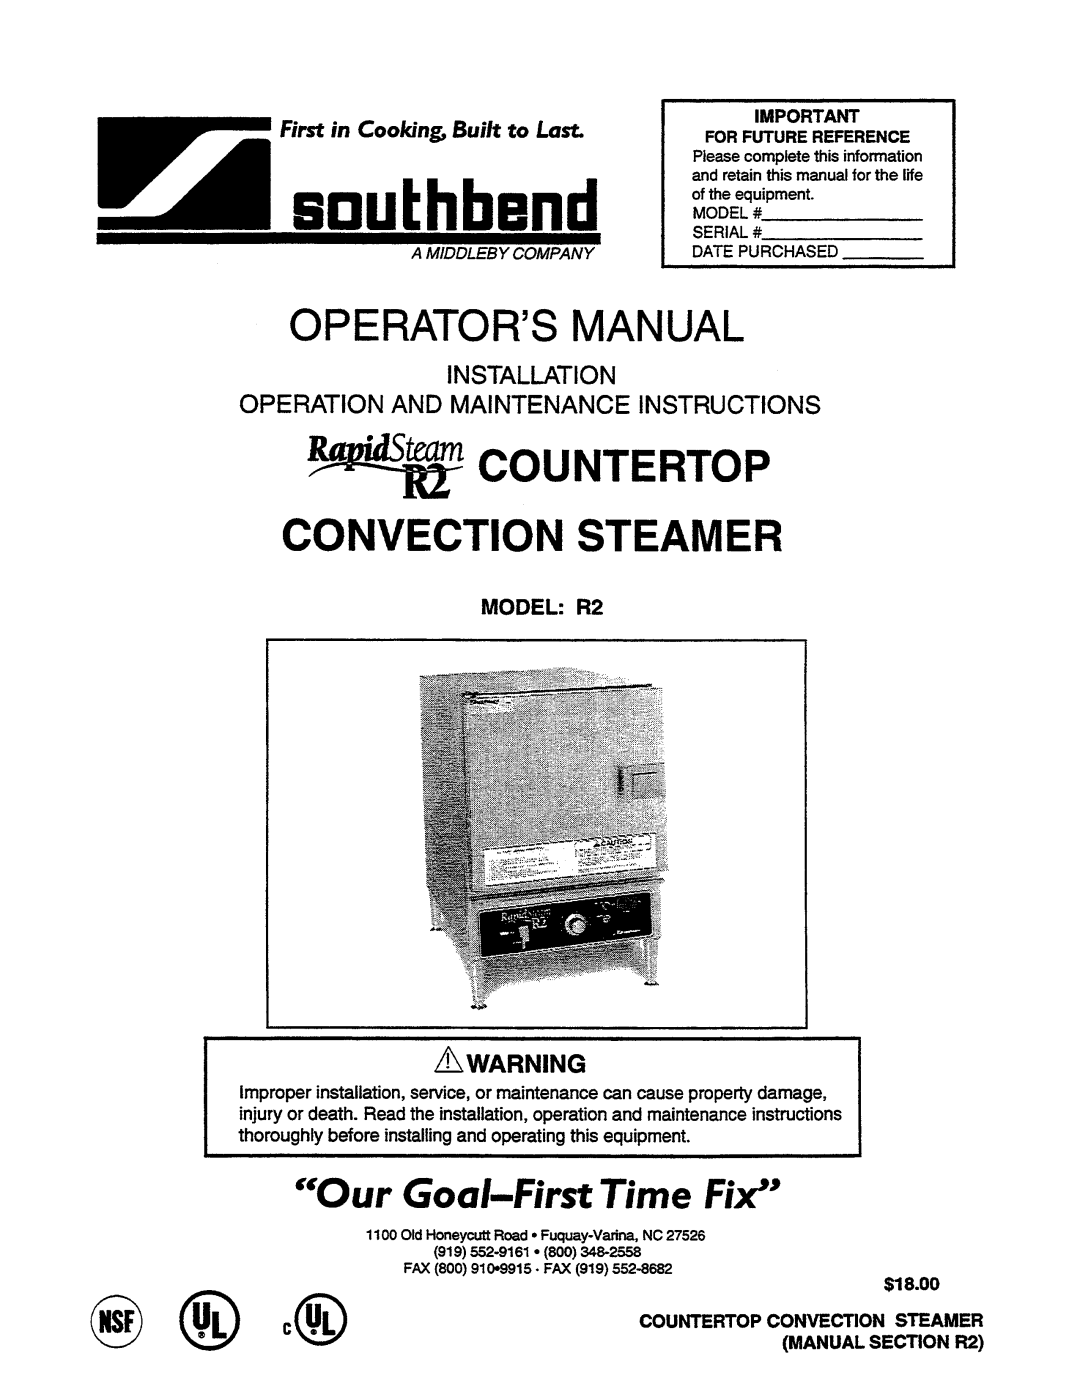 Southbend manual “Our Goal-FirstTime Fix”, Awarning, Installation, Operation And Maintenance Instructions, MODEL R2 